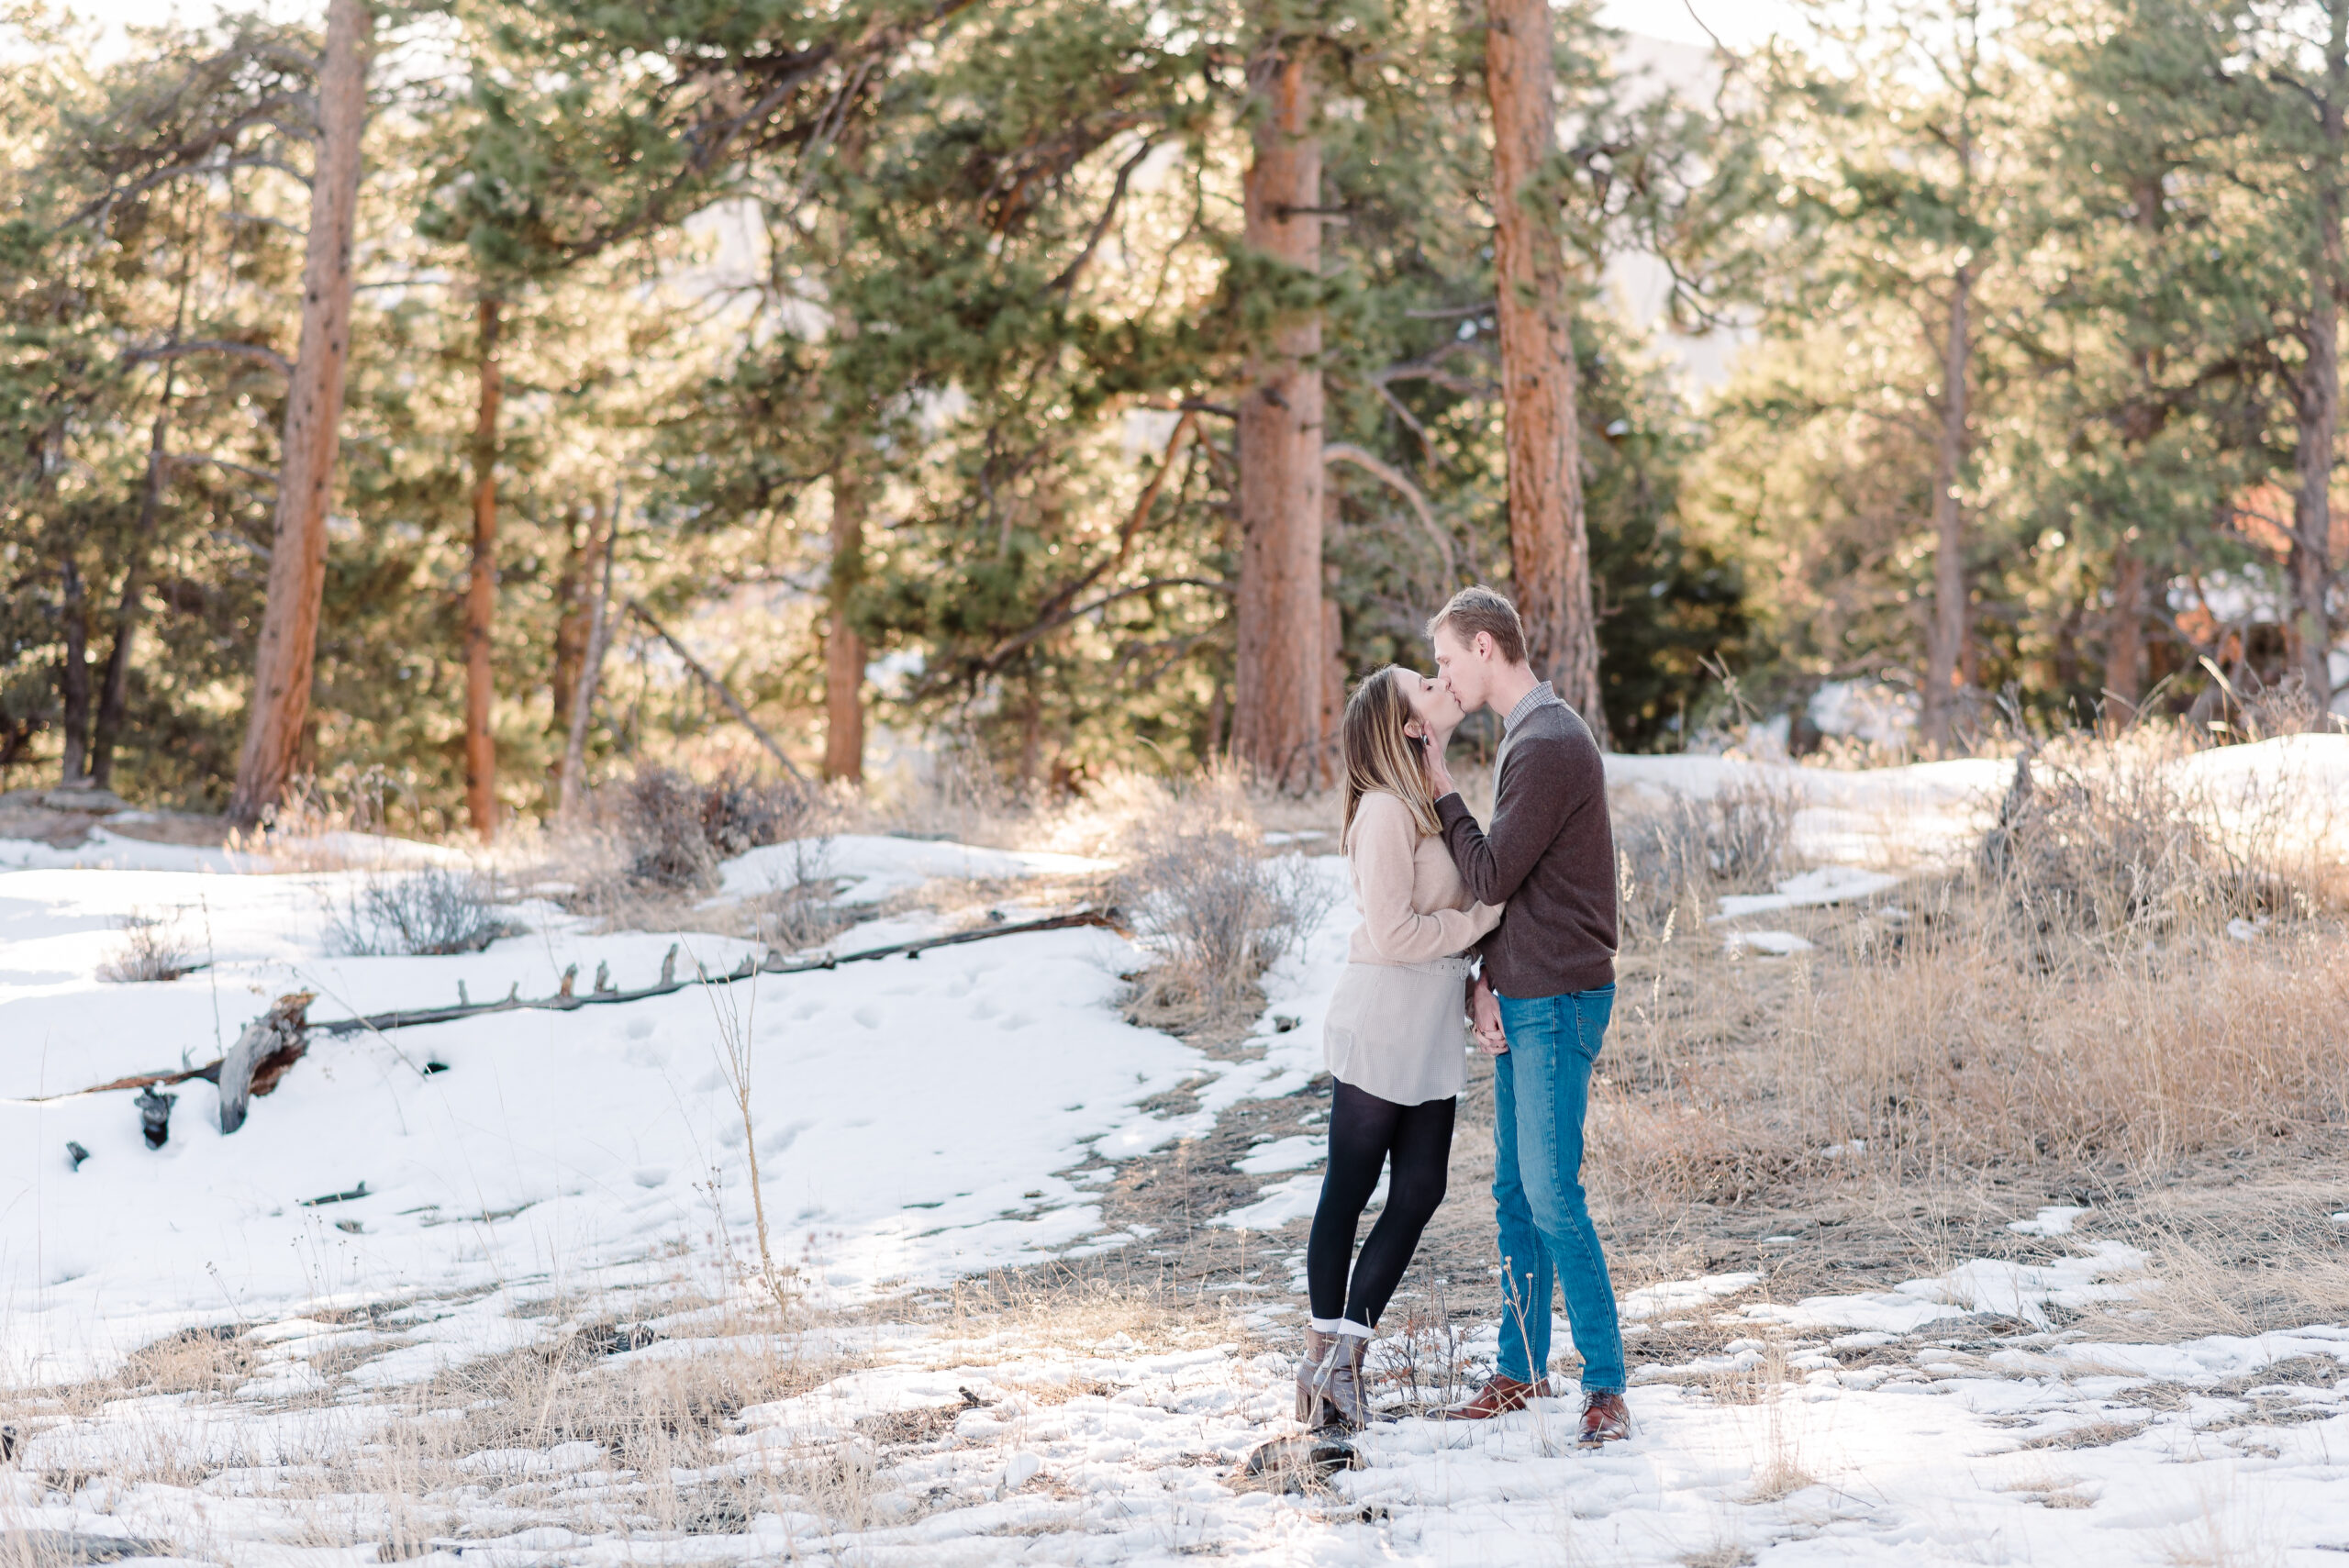 A man and woman face each other and embrace while kissing in the wooded area of Mt Falcon with snow covering the ground